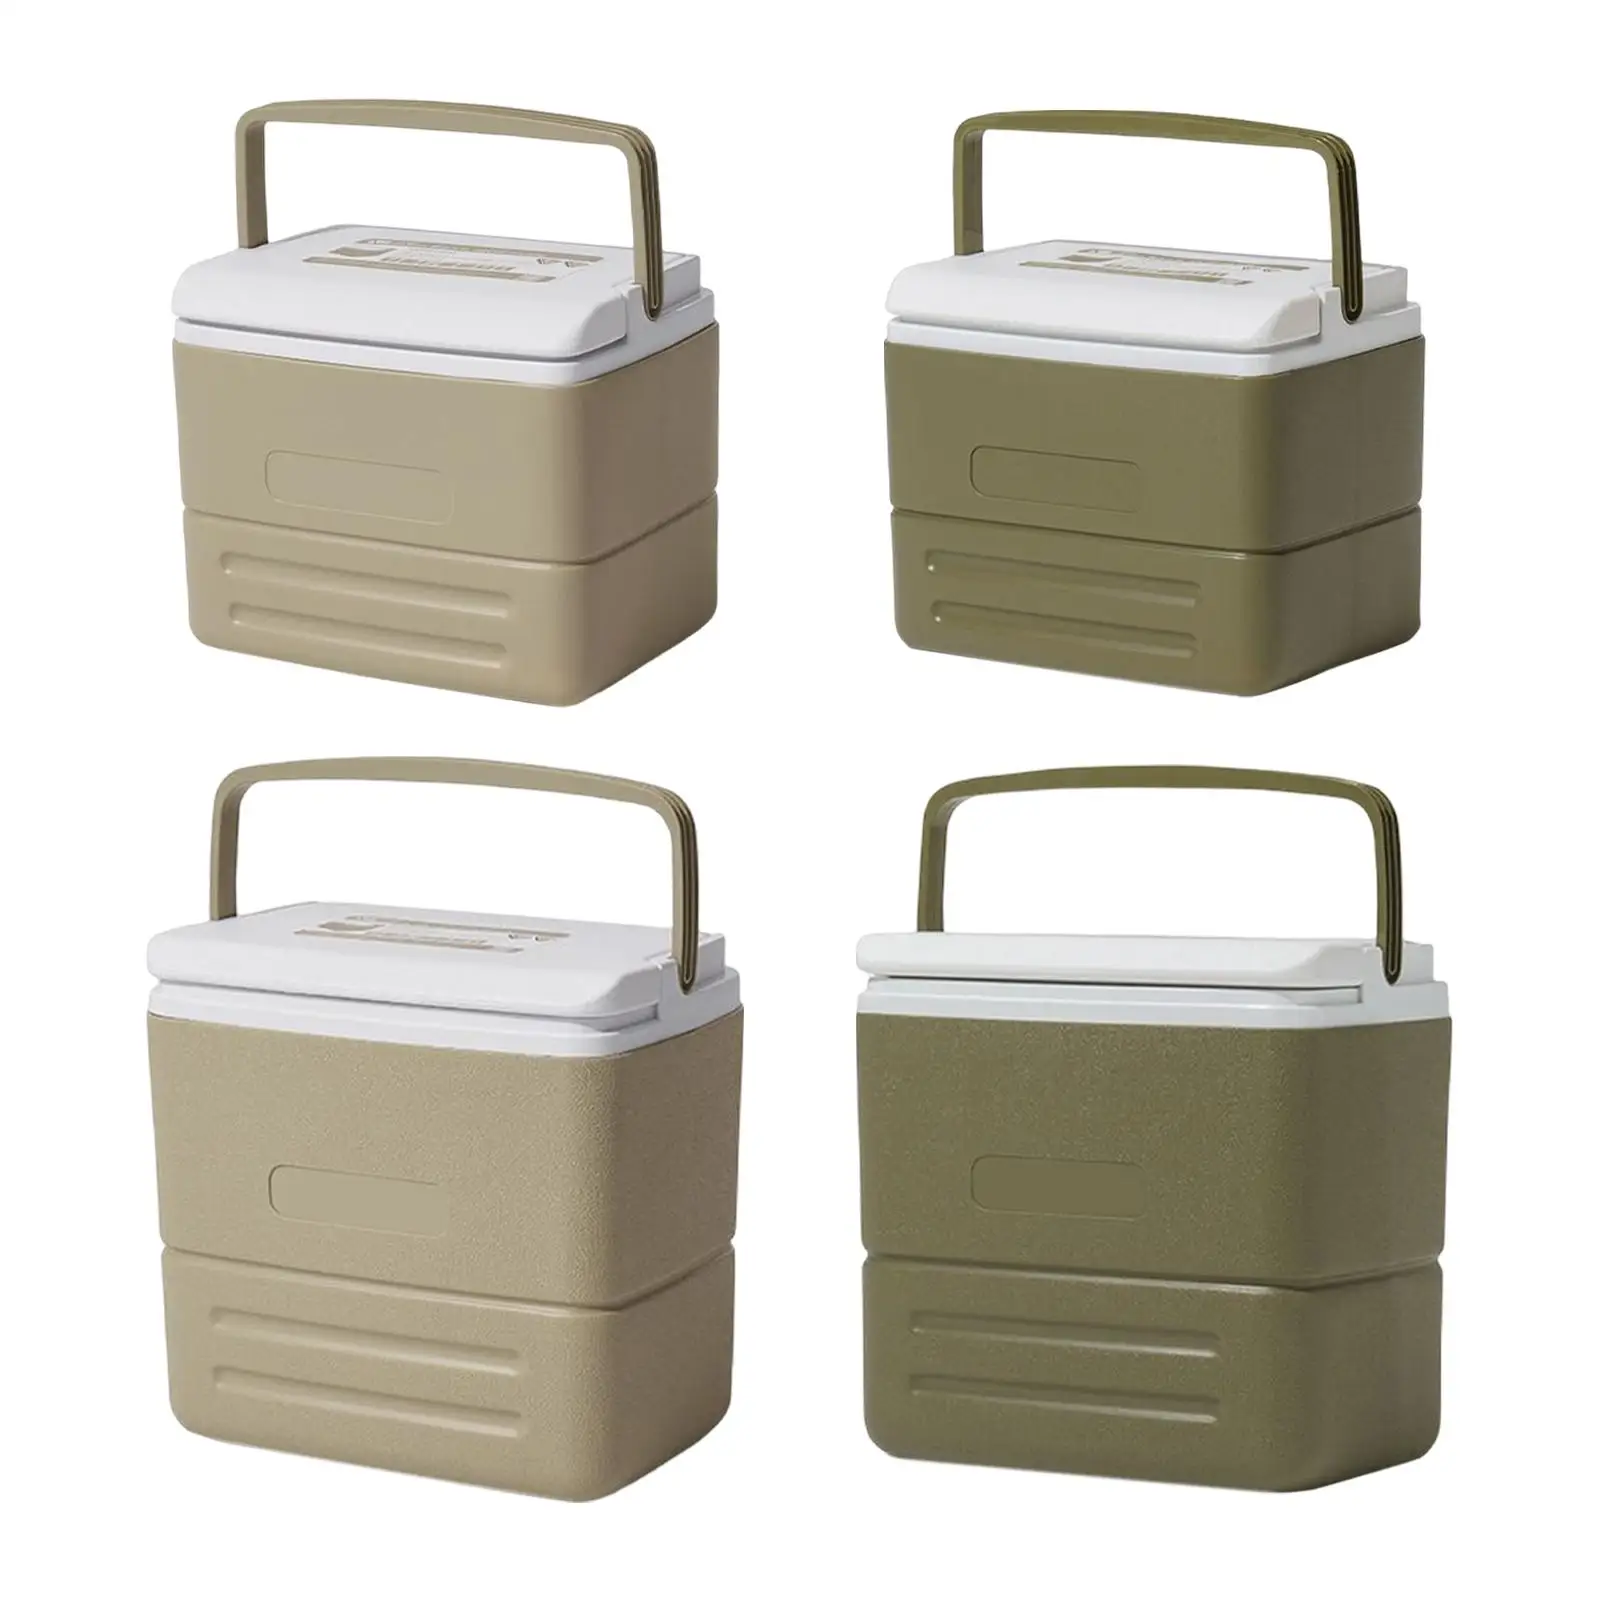 

Cooler Bag Catering Therma Organizer Food Warm Fridge Food Delivery Insulated Thermal for Camping Picnic Lunch Fishing Trucking